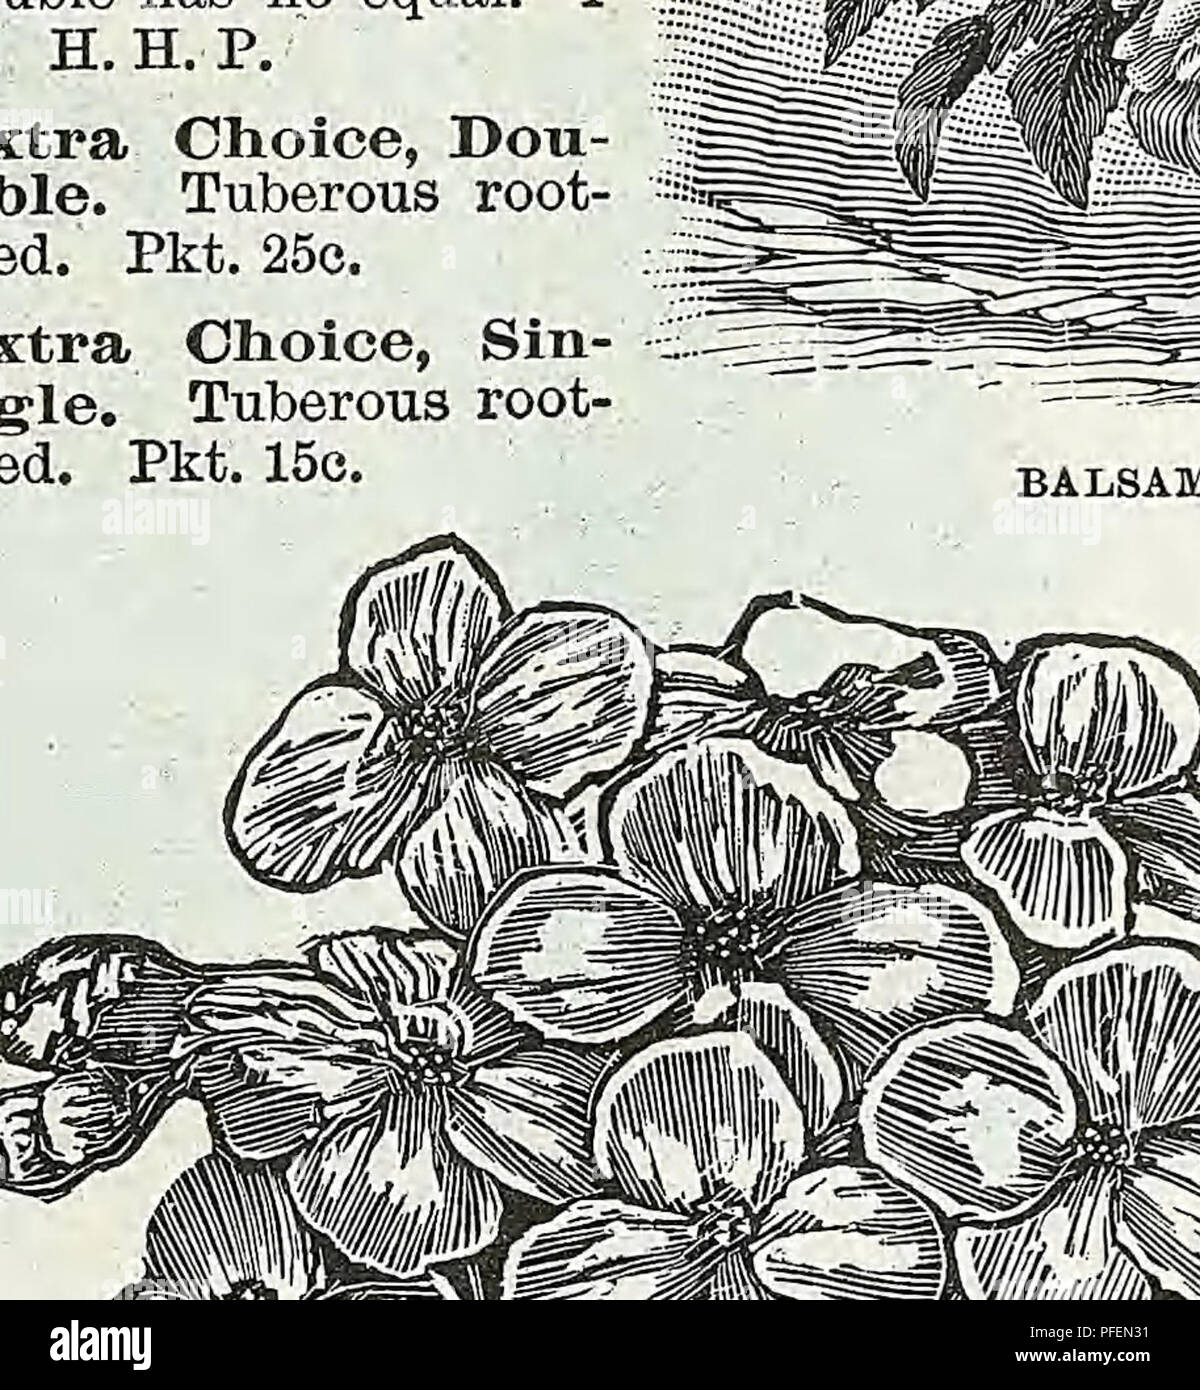 . Descriptive catalogue of vegetable, flower, and farm seeds. Nurseries (Horticulture); Nursery stock; Seeds; Bulbs (Plants); Gardening; Equipment and supplies; Bedding plants; Weeber &amp; Don. CALENDULA. METEOB CACALIA (Tassel Flower). A very beautiful and profuse flowering plant, with tassel-shaped flowers. H. A. Coccinea, Orange-scarlet, flowering in clusters; pretty, 1% ft. Pkt. 5c. CALANDRINIA. Beautiful, free-flow- ering plants, adapted for rock-work and dry, hot situations. H. A. Splendid Mixed. 1 ft. Pkt. 5c. CALCEOLARIA Plants of a highly decorative character, forming in spring dense Stock Photo